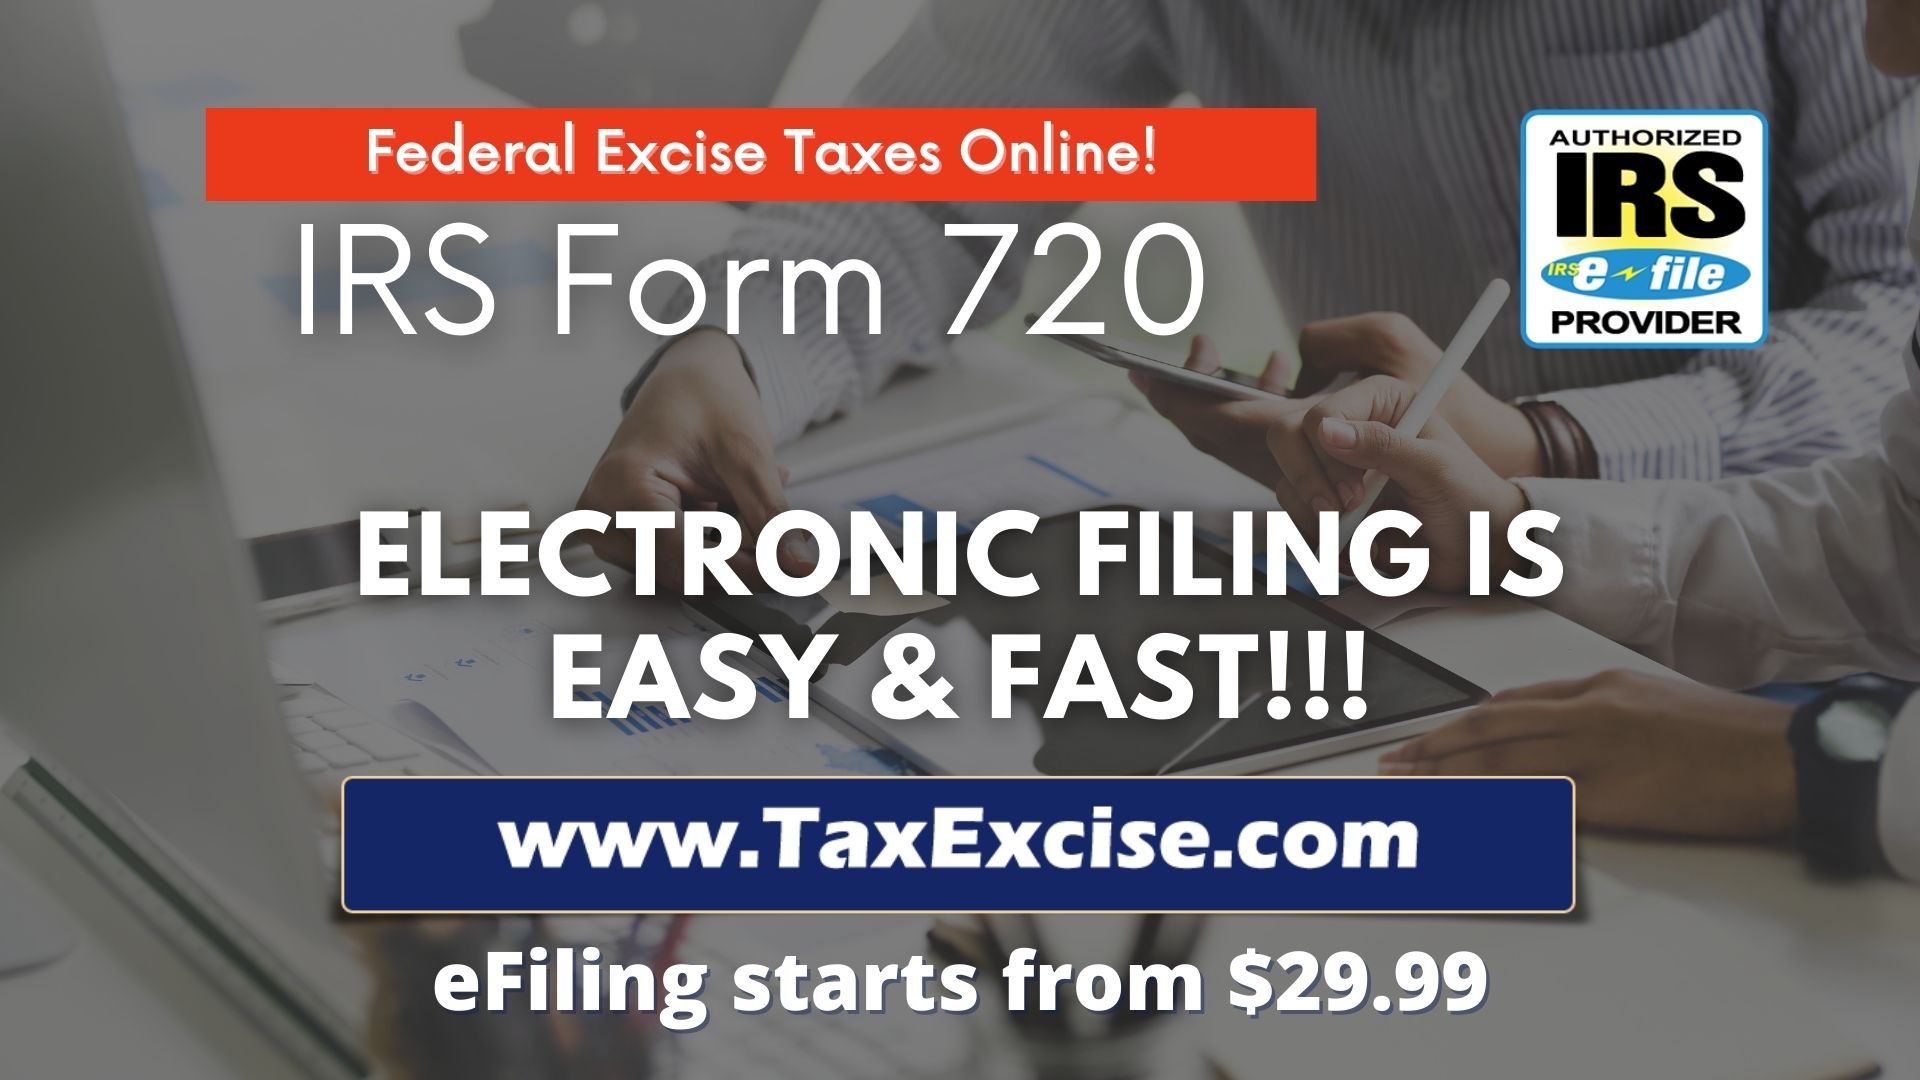 720 Quarterly Excise Taxes Online